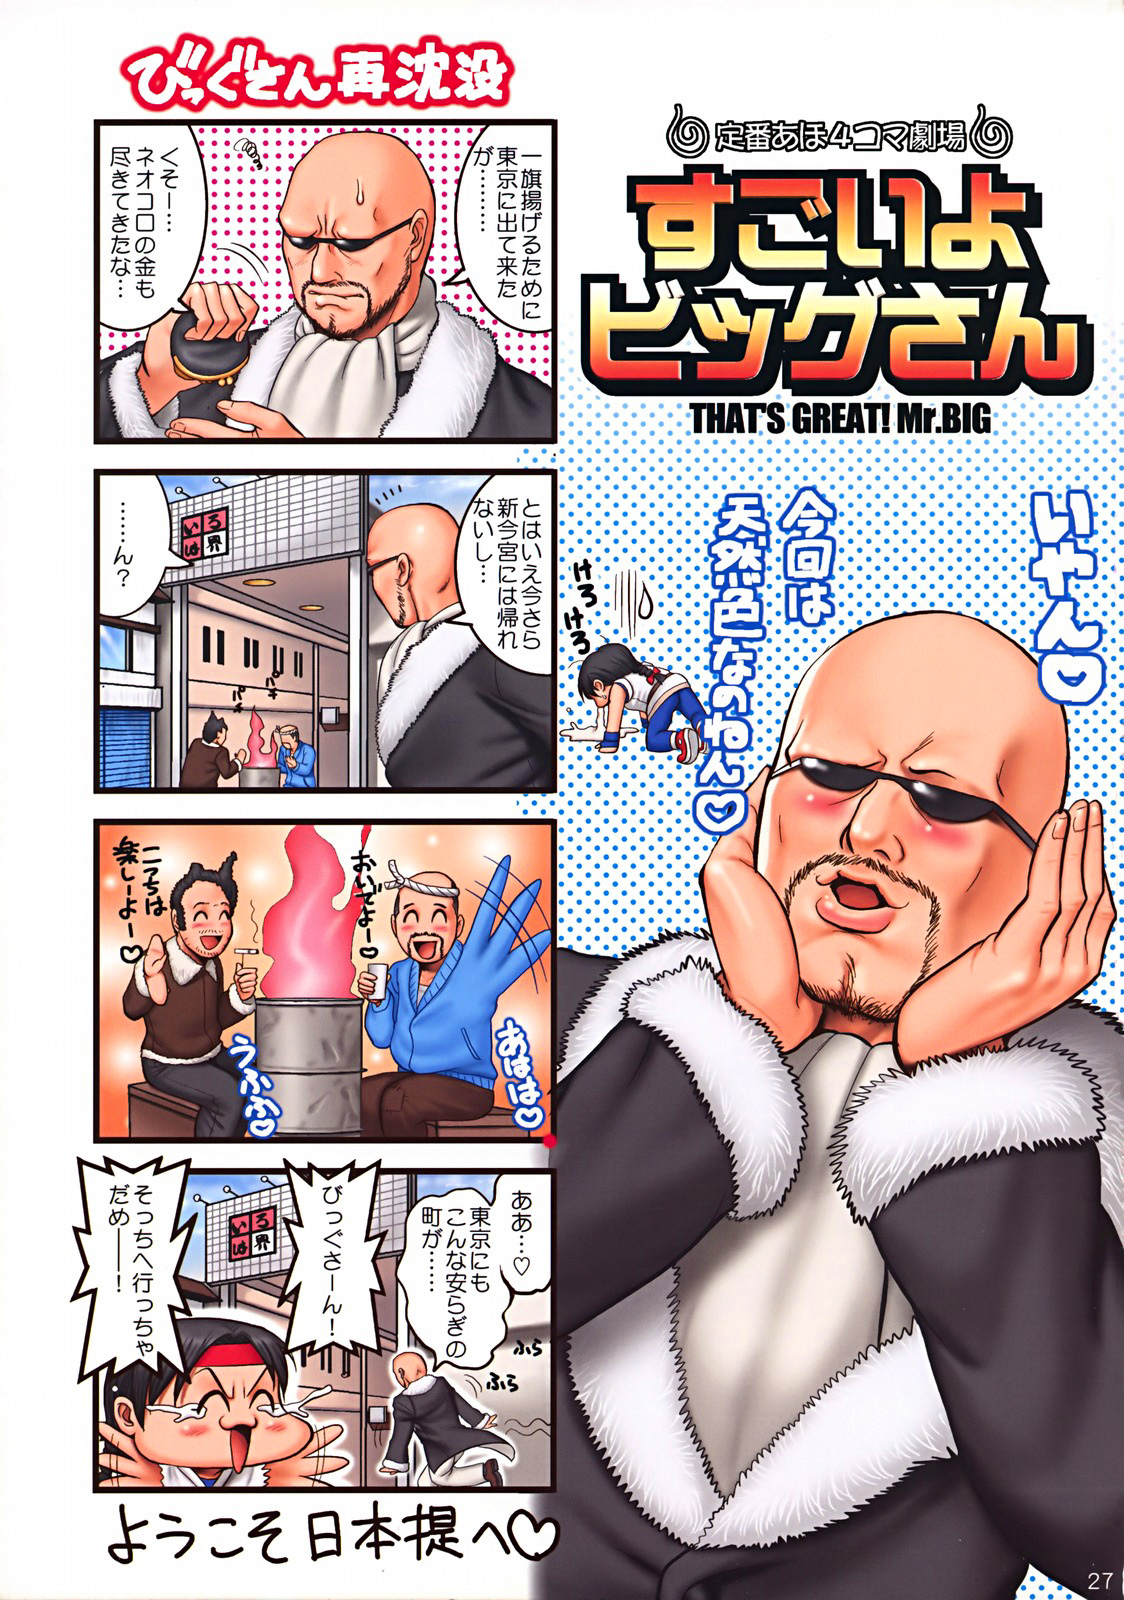 (C72) [Saigado] THE YURI & FRIENDS FULLCOLOR 9 (King of Fighters) [Decensored] page 26 full